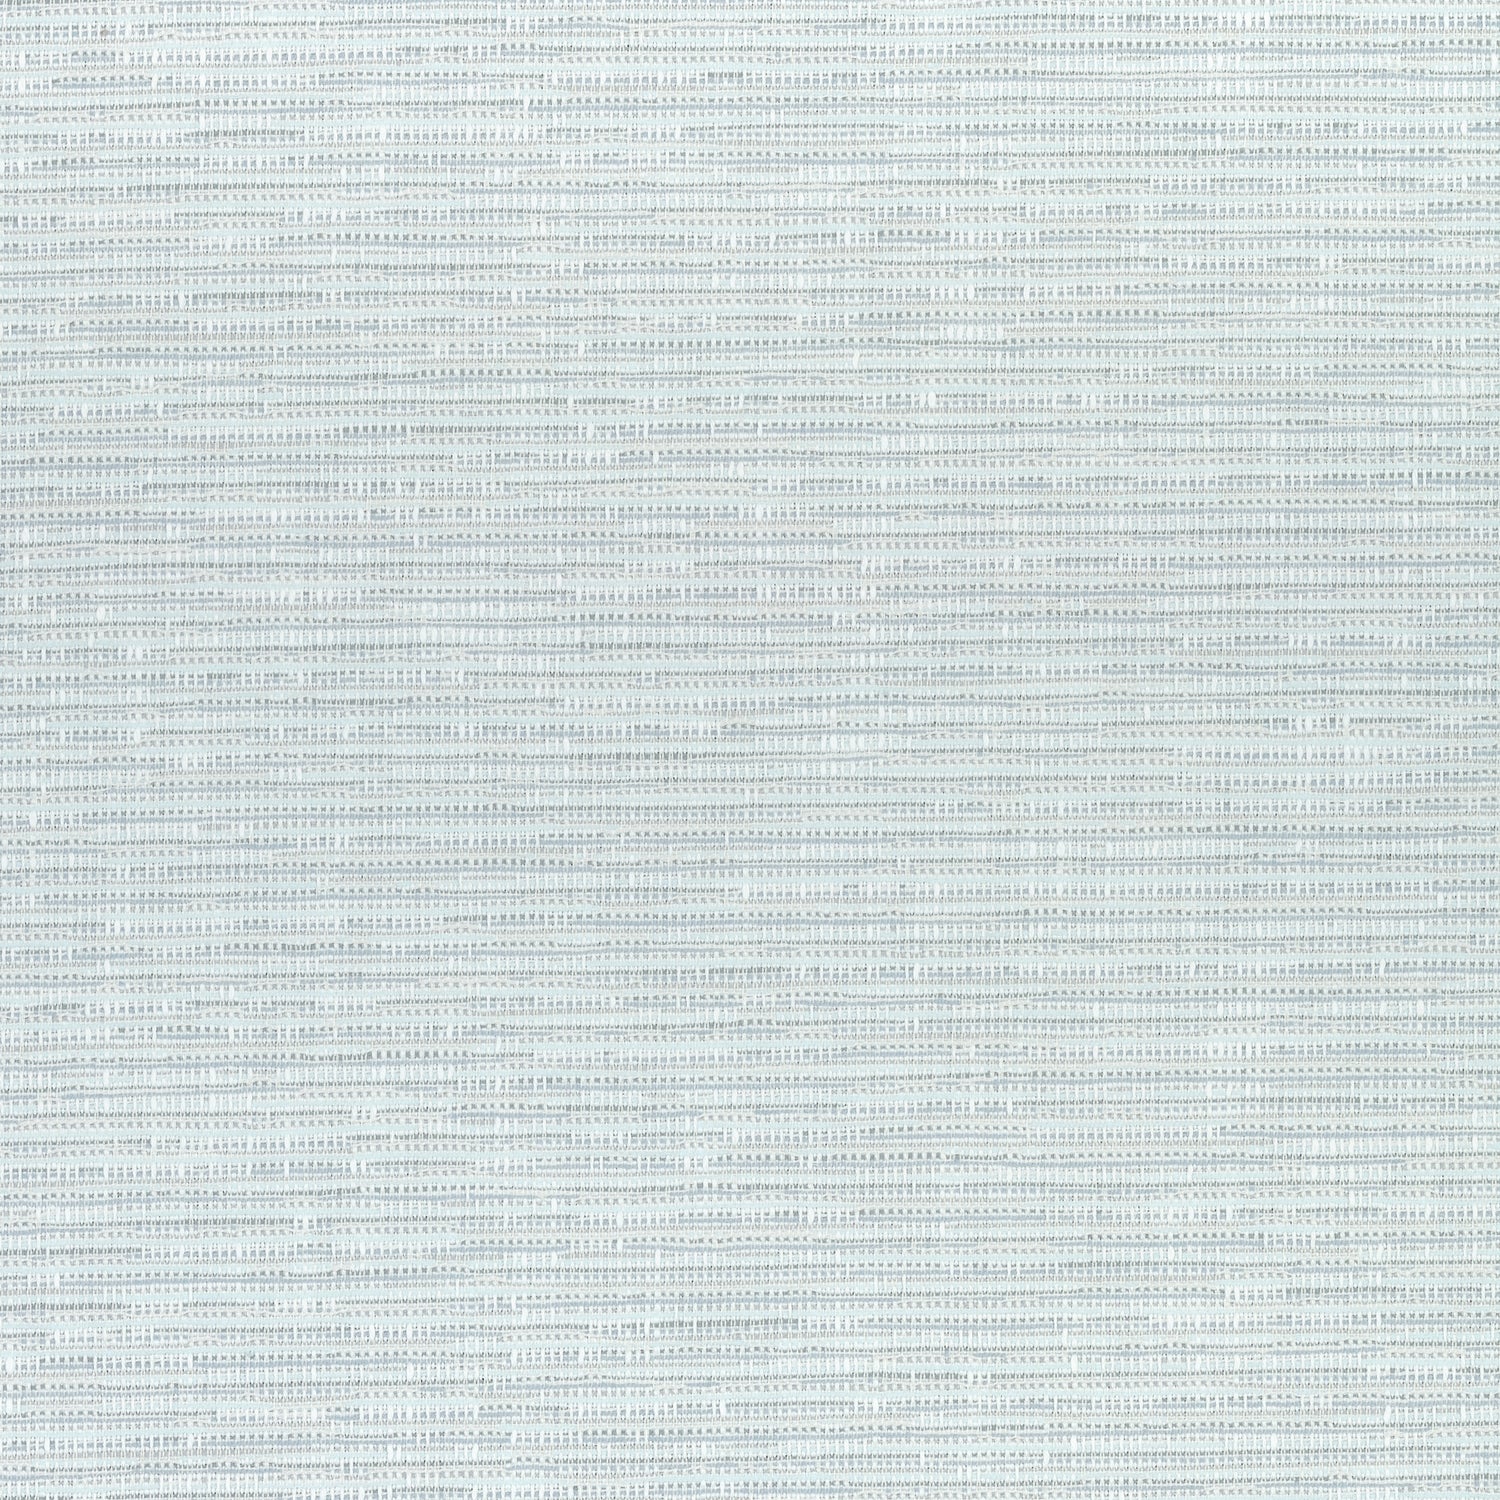 Cadence fabric in mist color - pattern number W74048 - by Thibaut in the Cadence collection